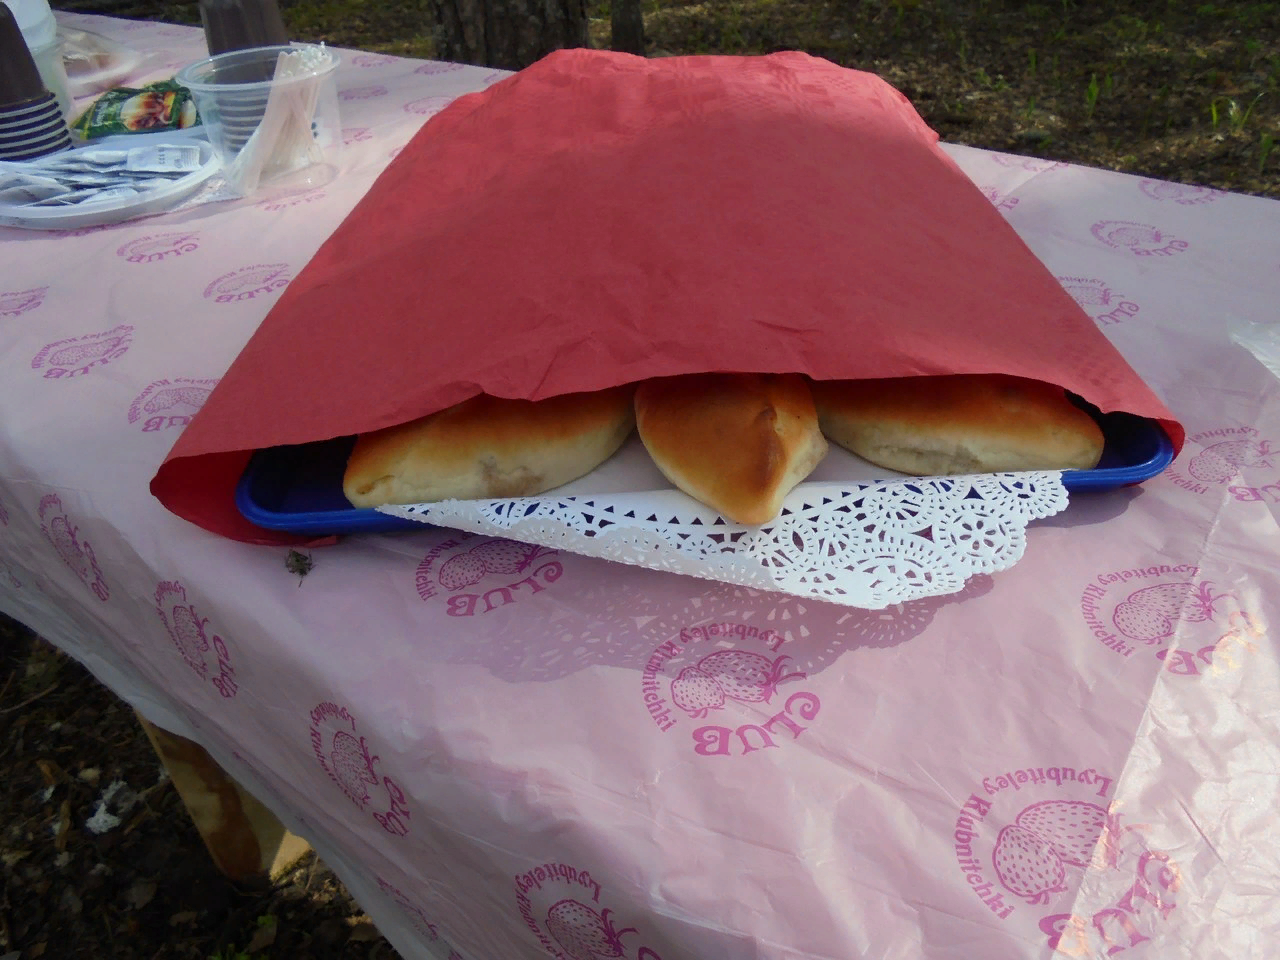 Turtle under a blanket - My, The photo, Humor, Associations, Students, Studies, Studying at the University, Memories, Pie, Pies